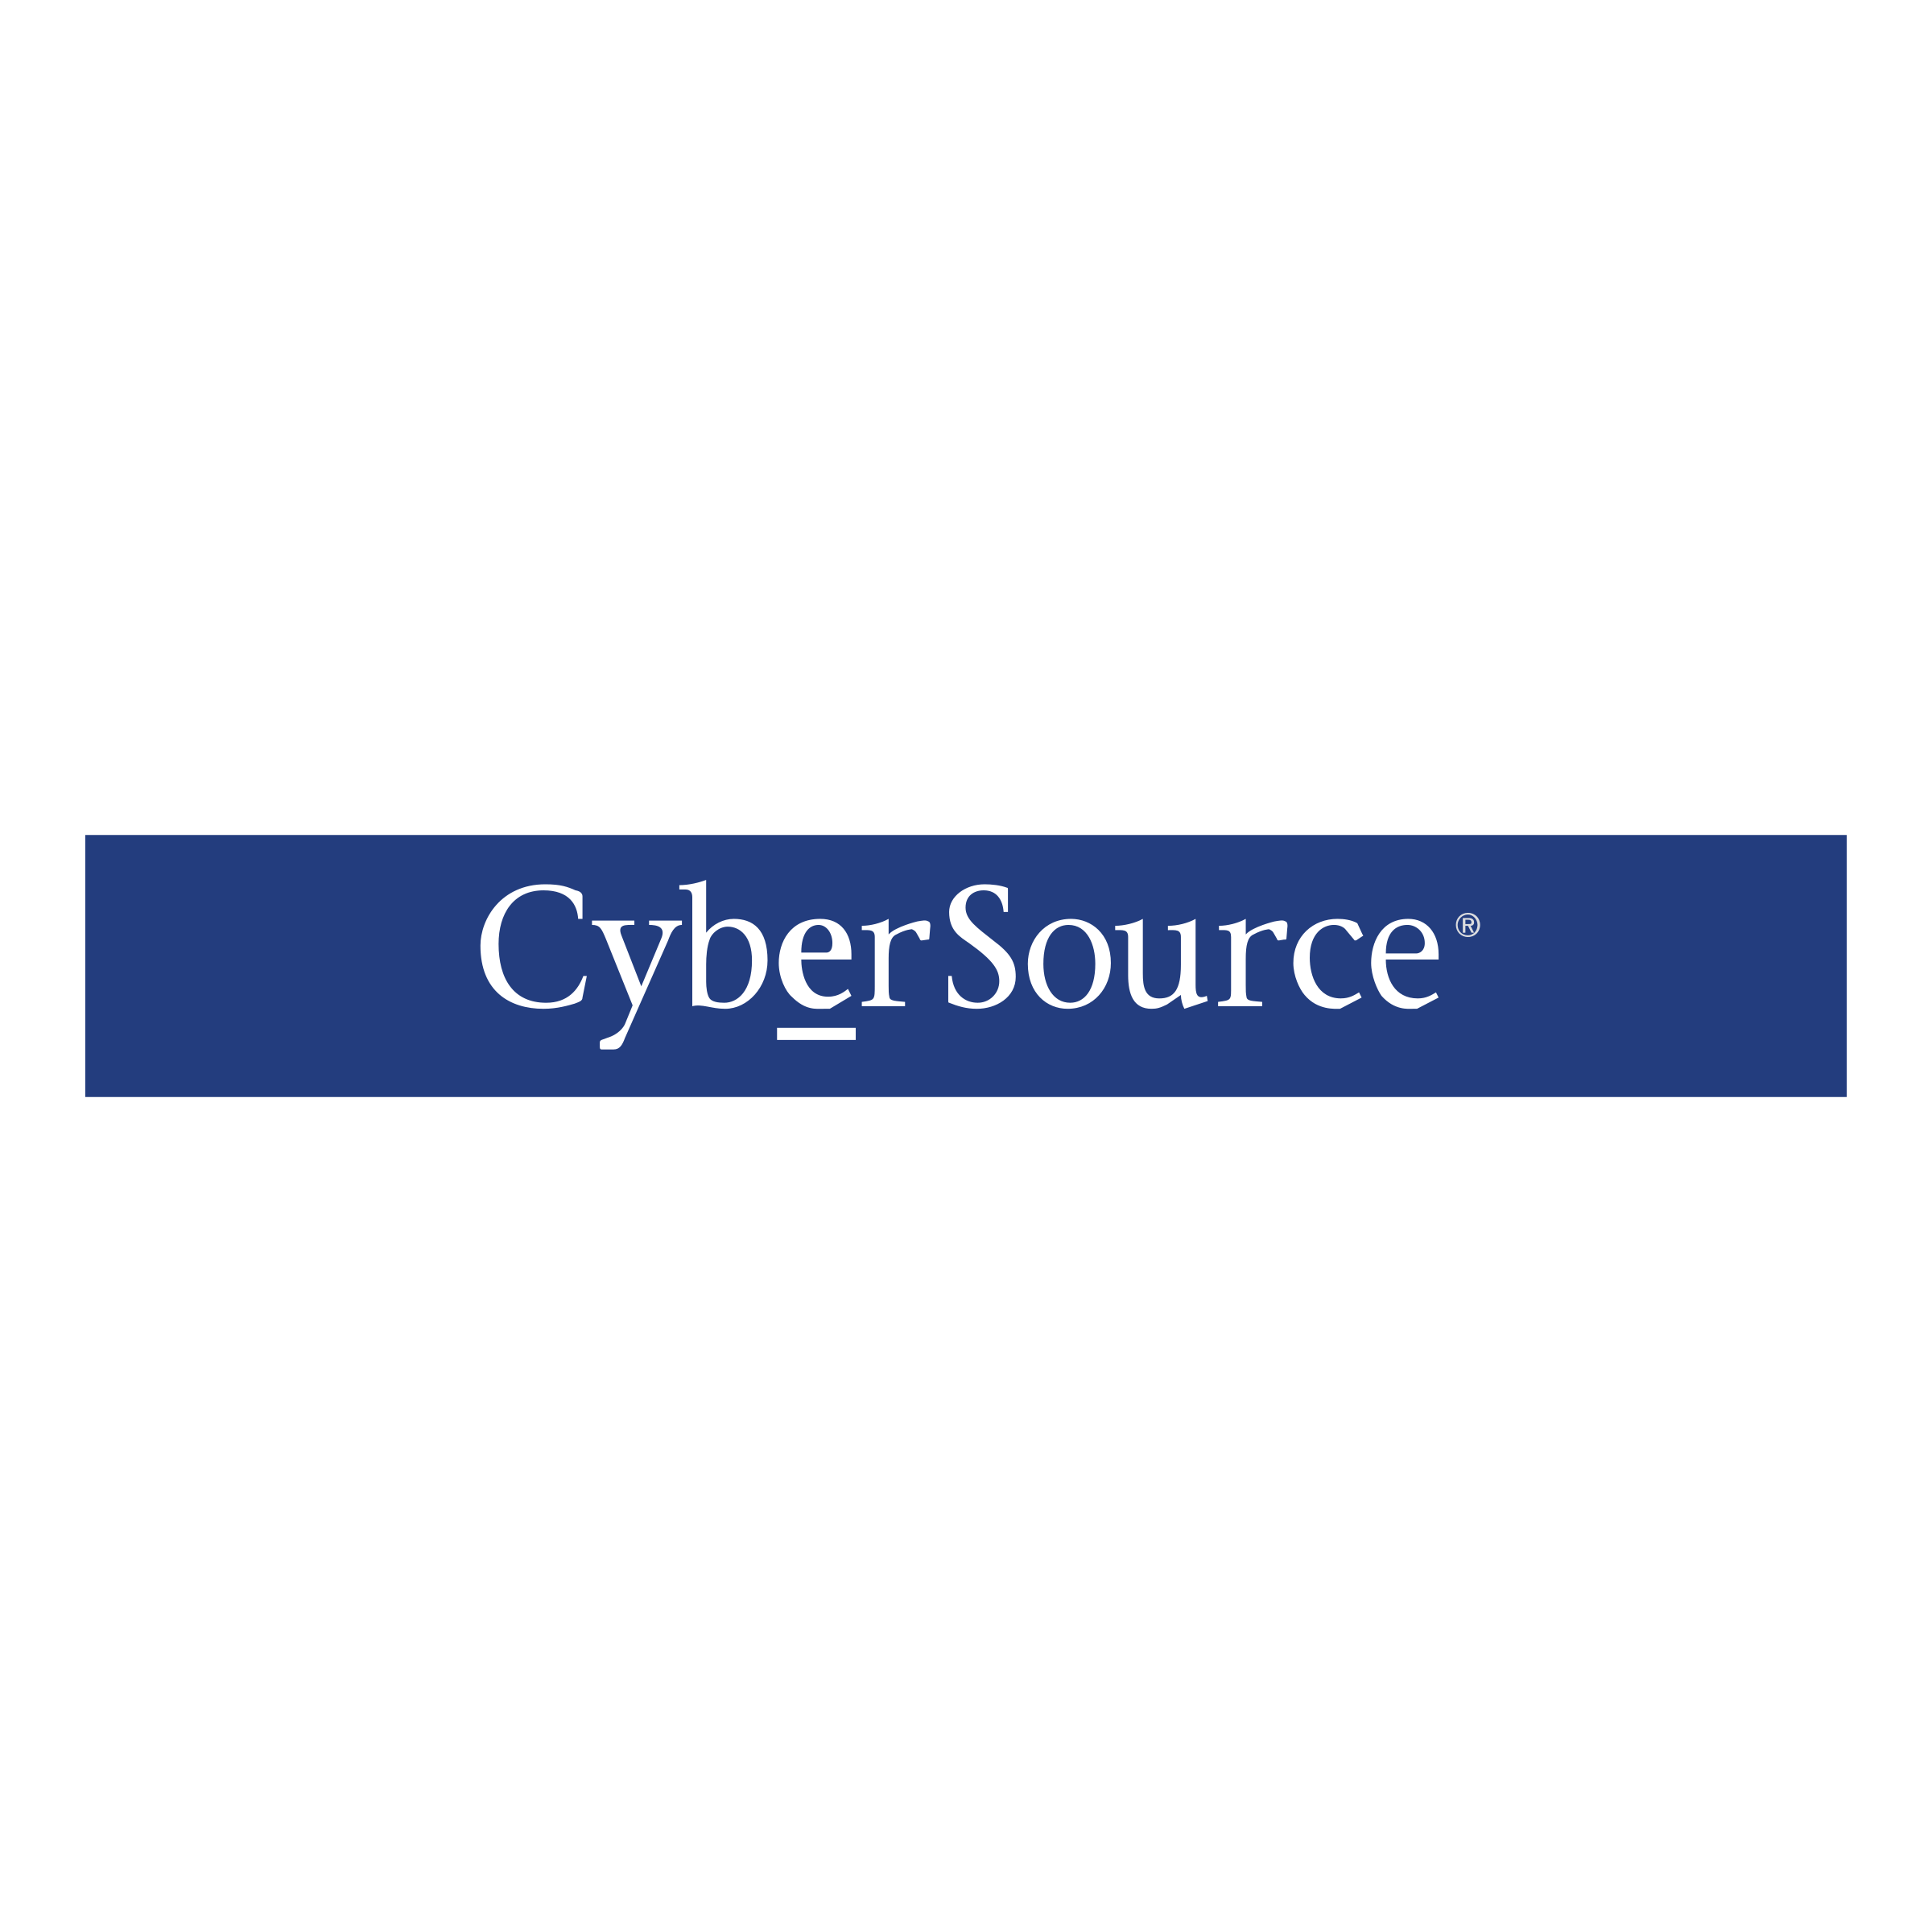 CyberSource Logo - CyberSource Logo PNG Transparent & SVG Vector - Freebie Supply